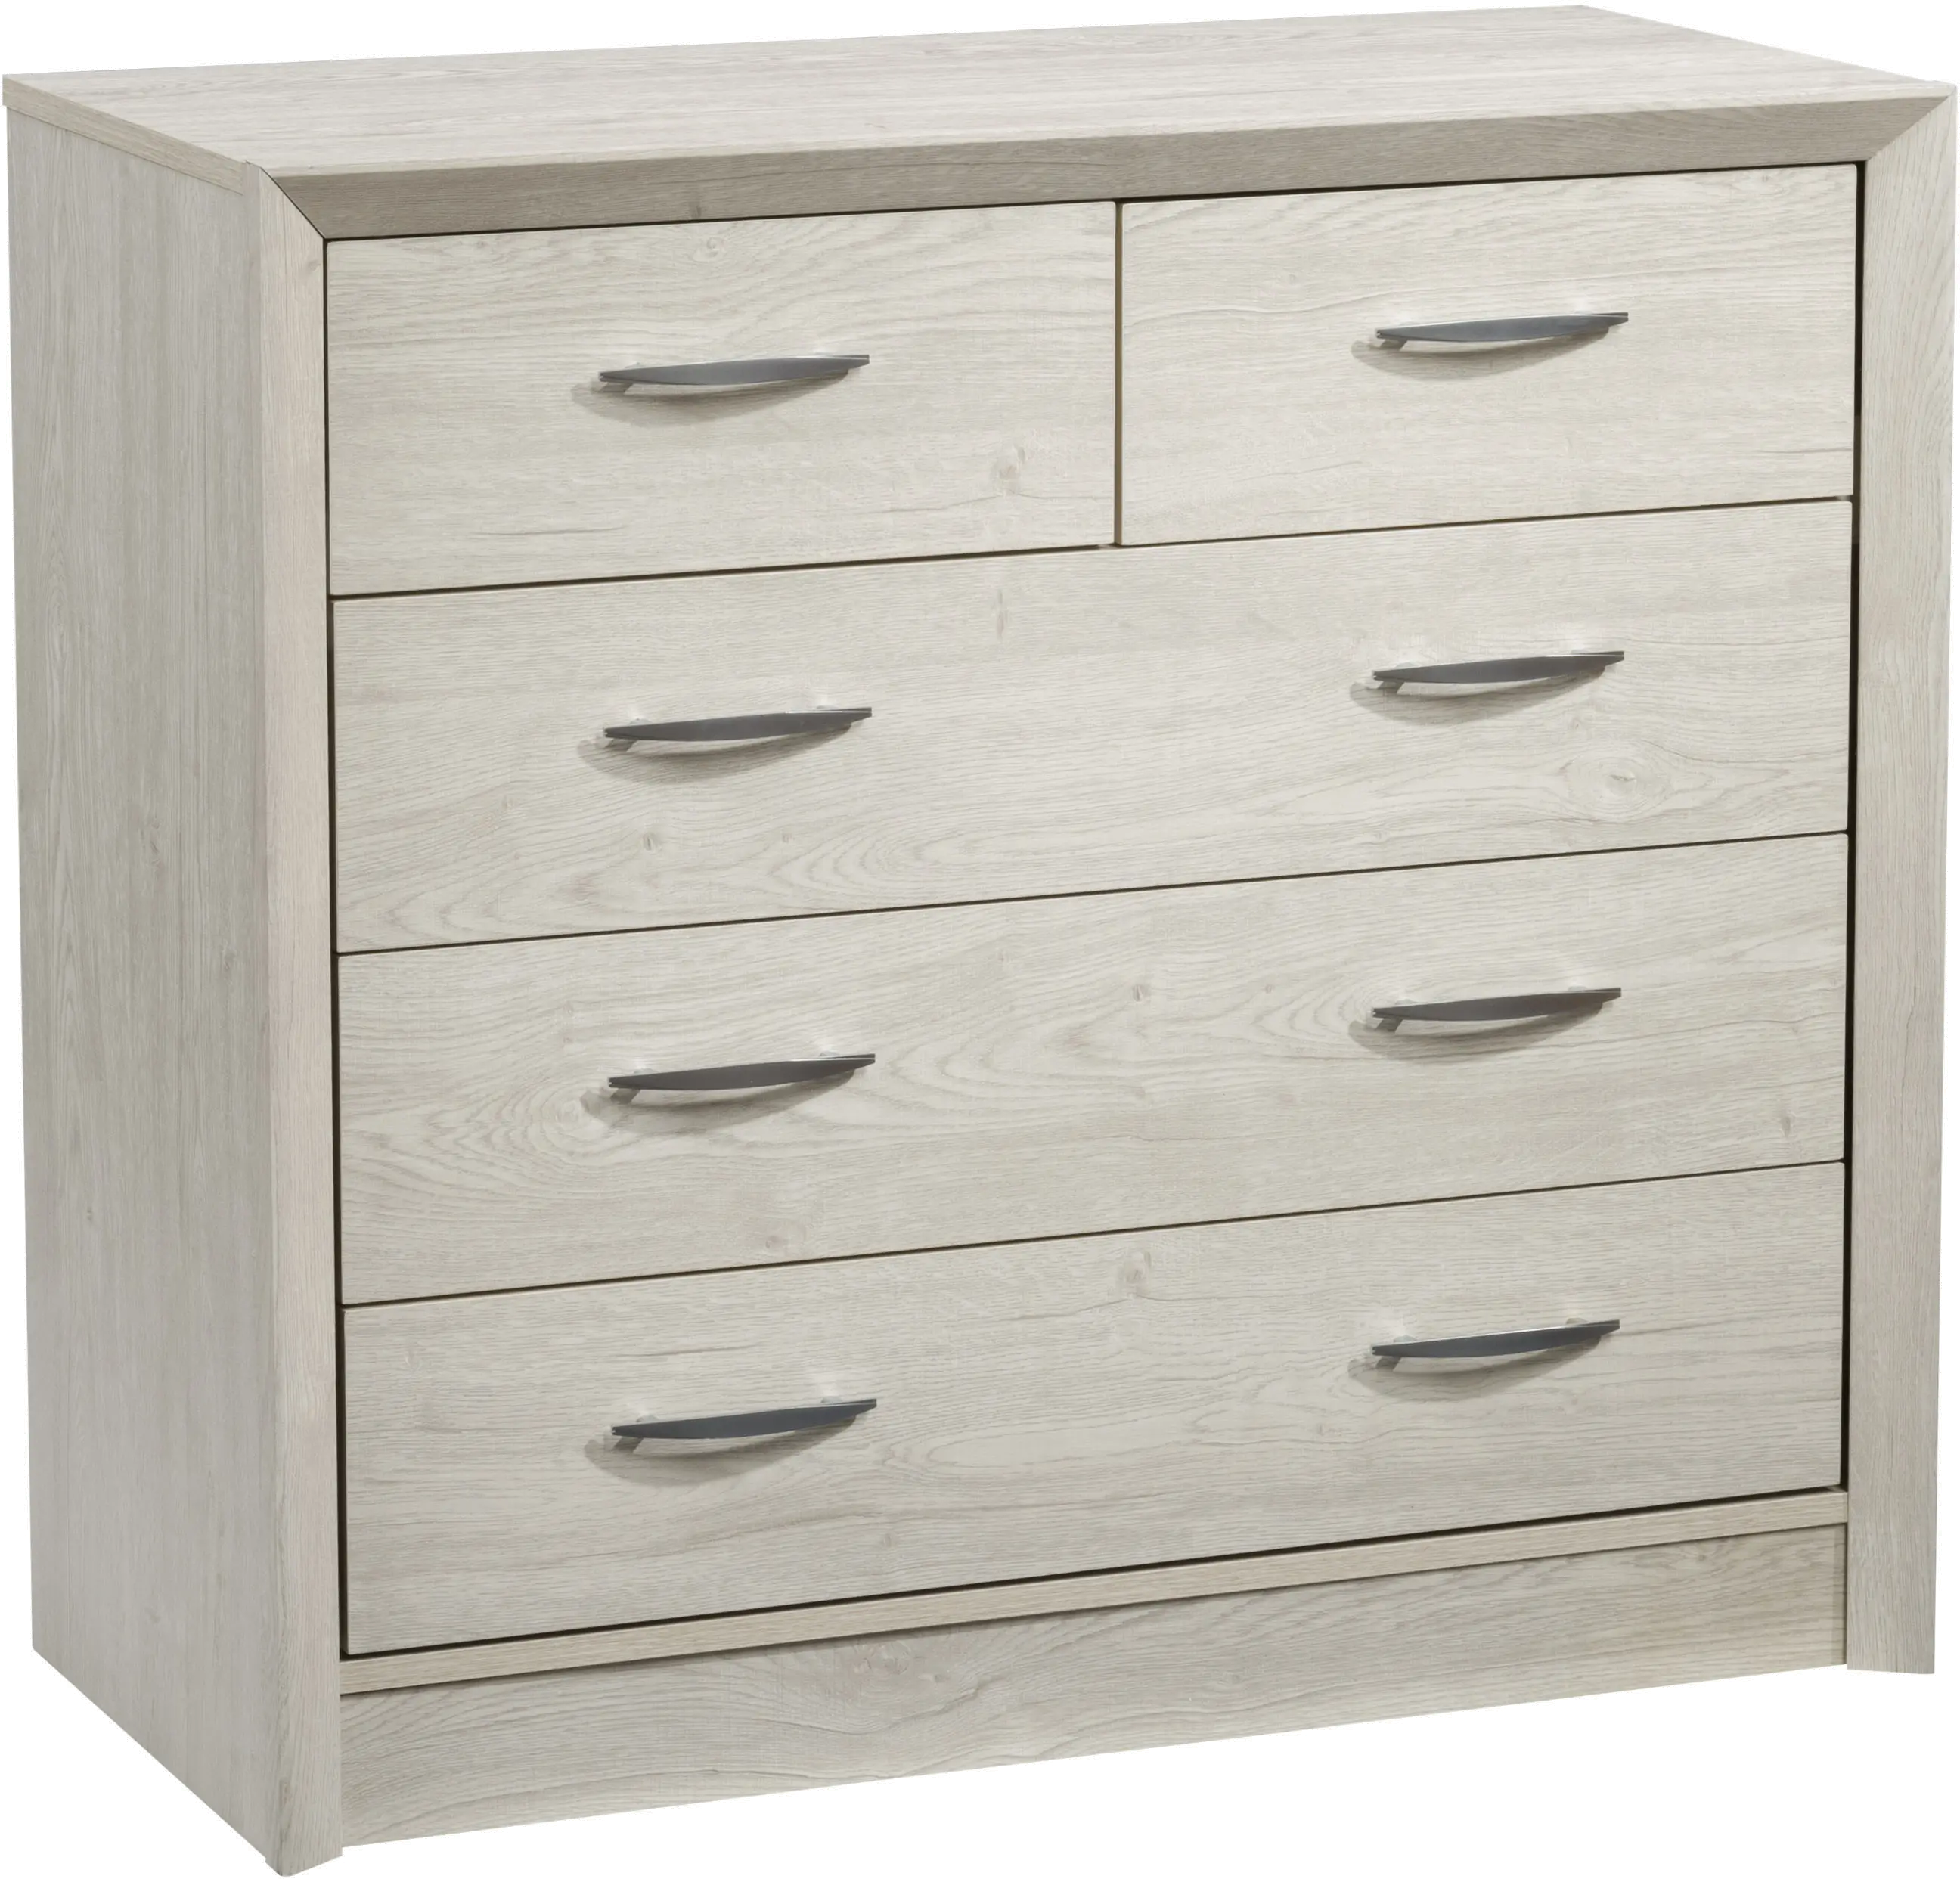 Photos - Dresser / Chests of Drawers CorLiving Newport Contemporary White Washed Oak Five Drawer Dresser NPT-30 